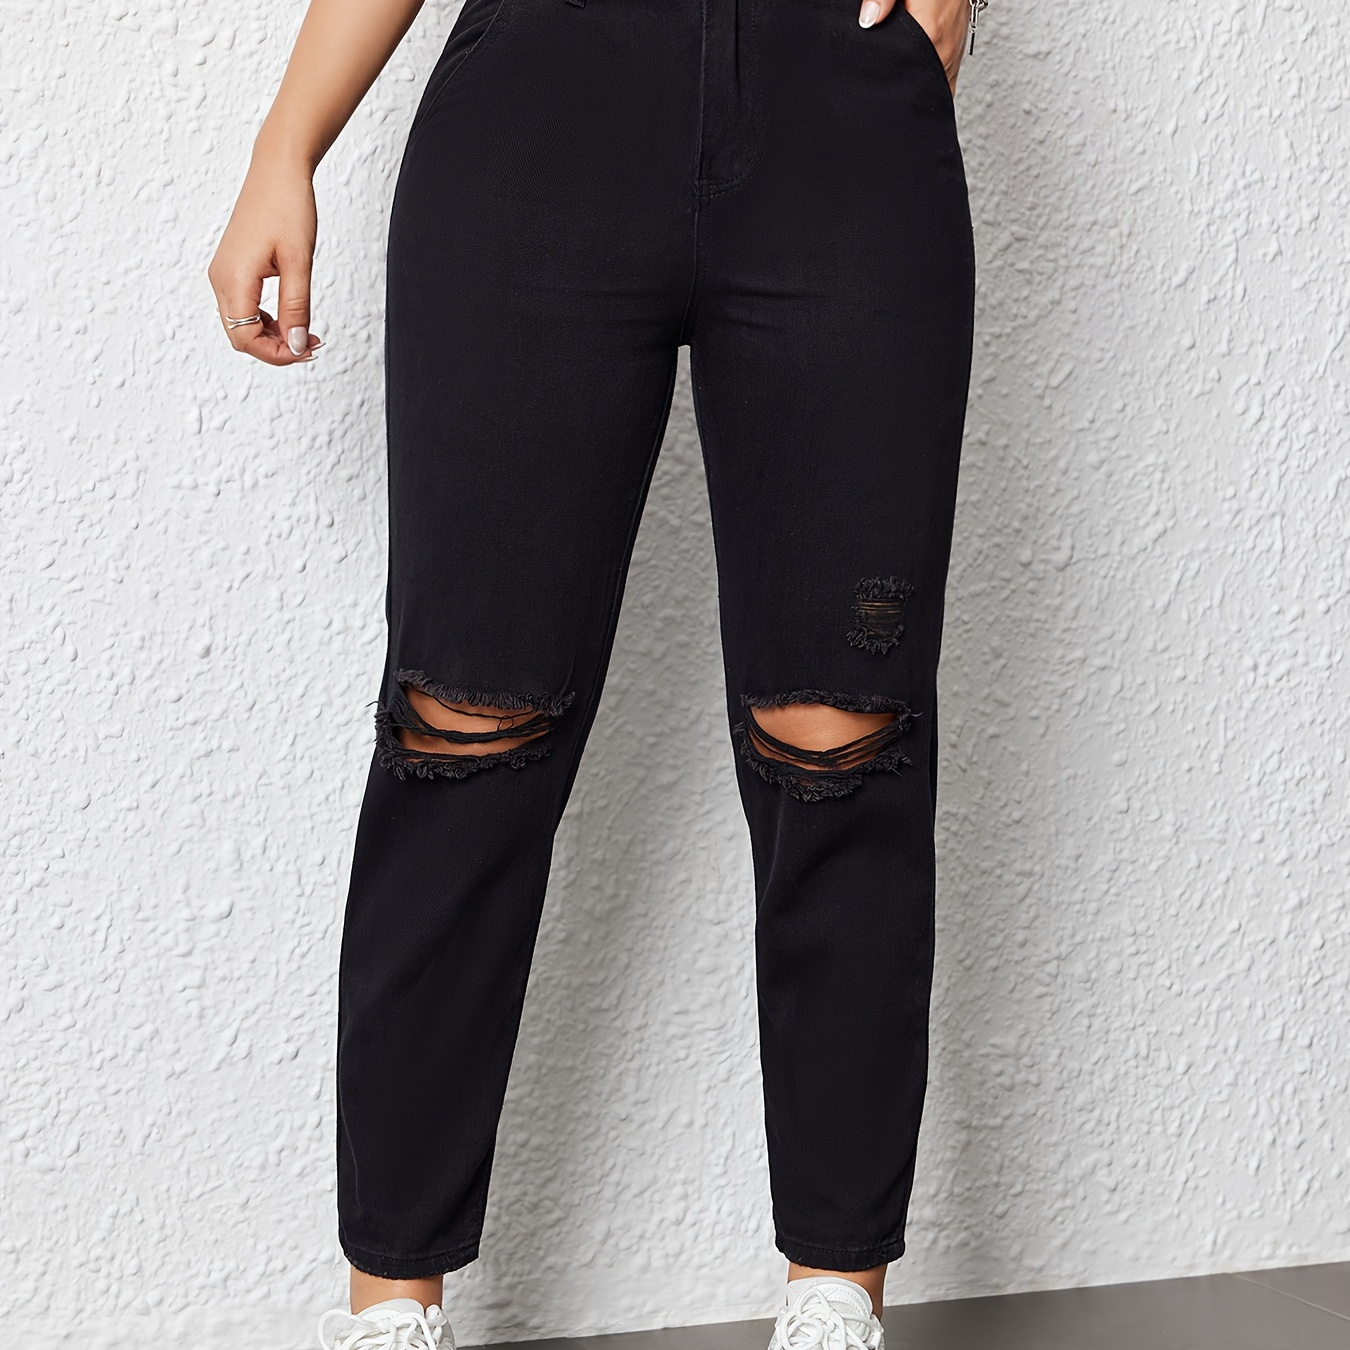 

Women's High-waisted Black Color Distressed Jeans, Street-style, Slim Fit With Elastic Waistband, Versatile Casual Denim Pants